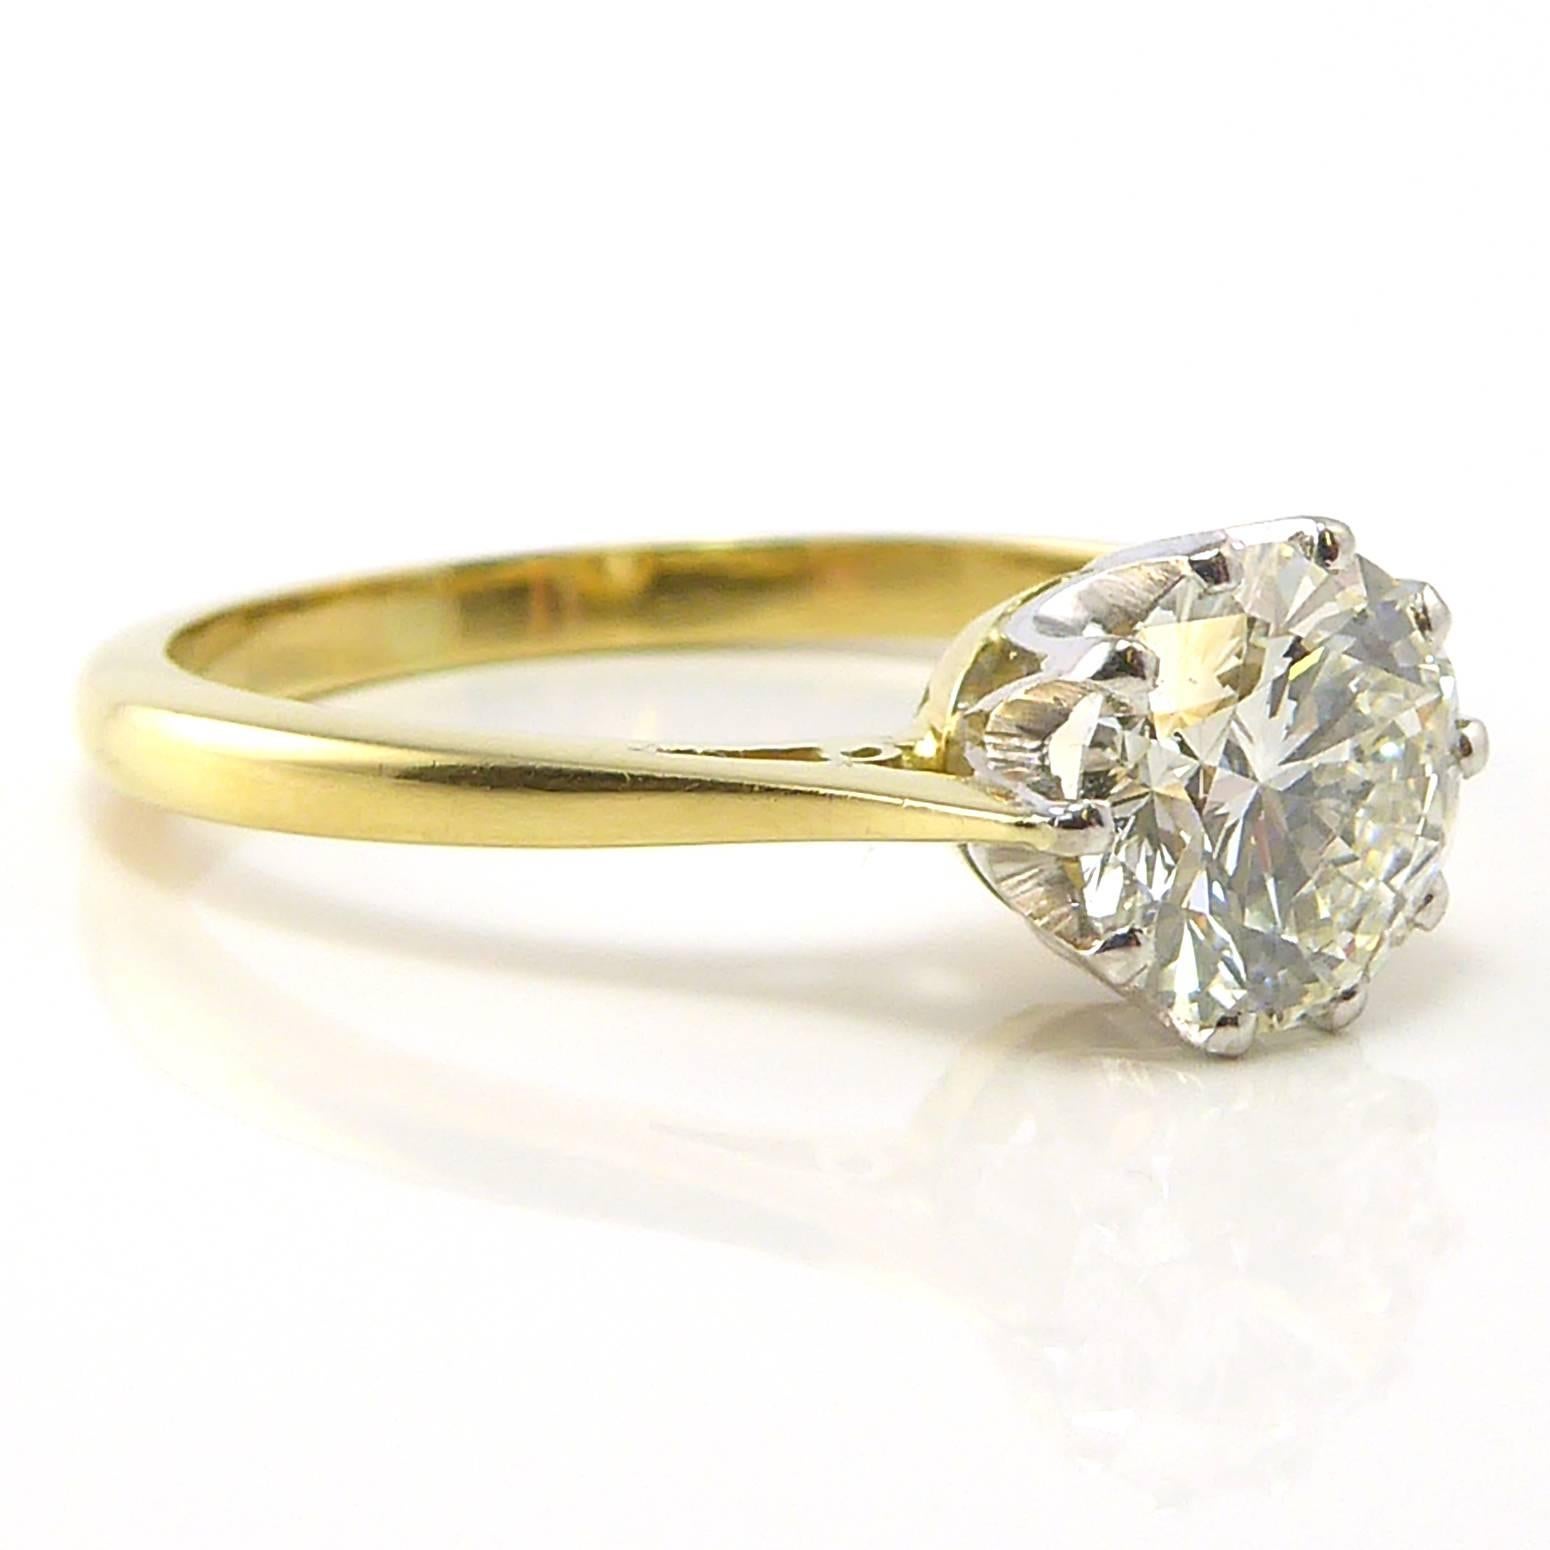 Details
1 x brilliant cut diamond
1.26ct
VVS2 clarity, I colour
Claw Set
18ct Yellow gold band
Hallmarked Sheffield 2000
Finger size 7 1/2 (US/Canada); P (UK/Australia)
Resizing available

A timeless style solitaire diamond engagement ring of recent